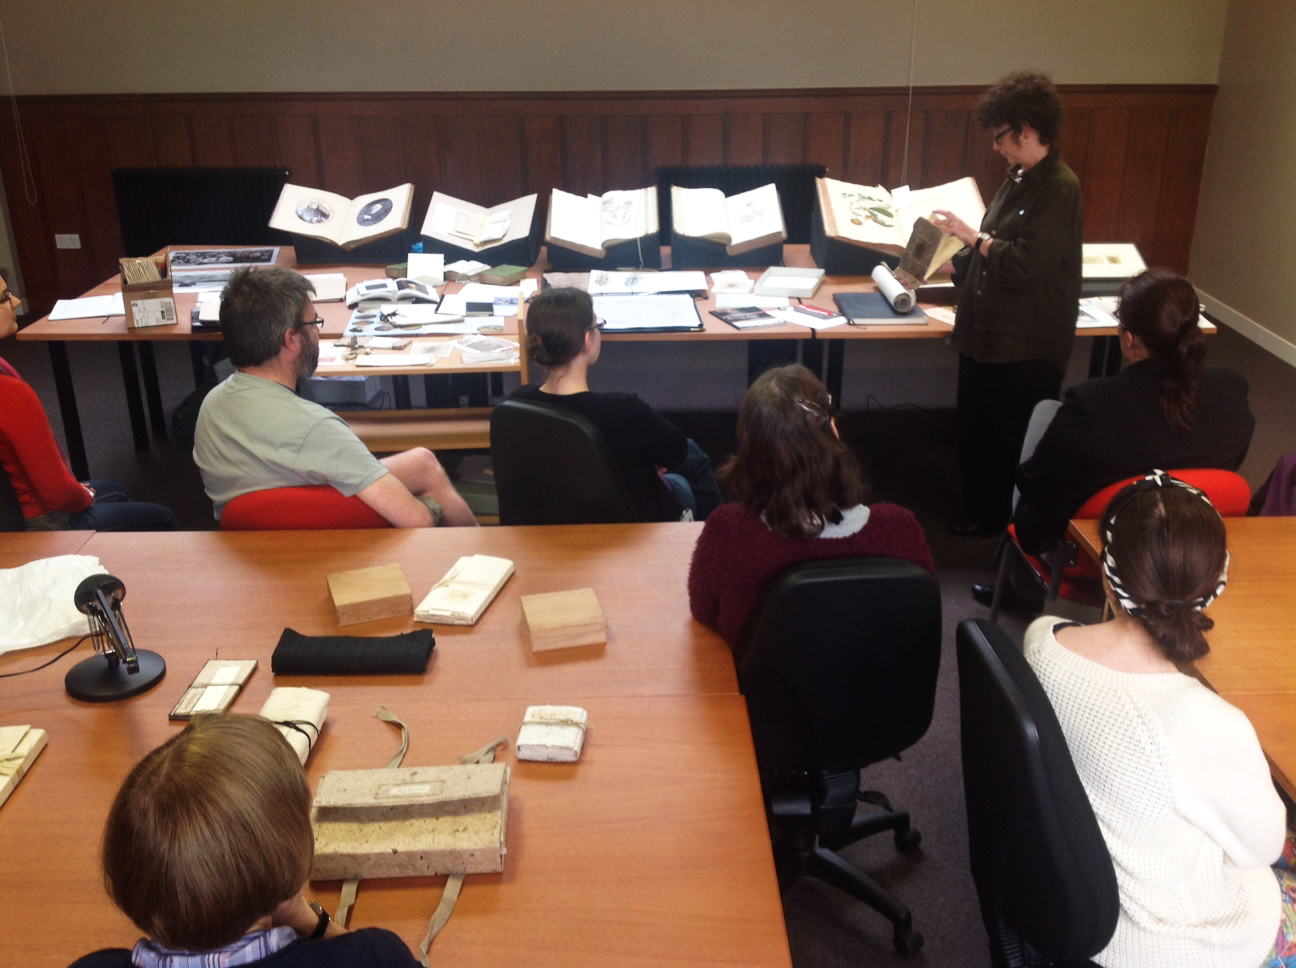 Jean Johnstone presenting some of her inspiration from the Special Collections for her newly commissioned work "A Special Collection."